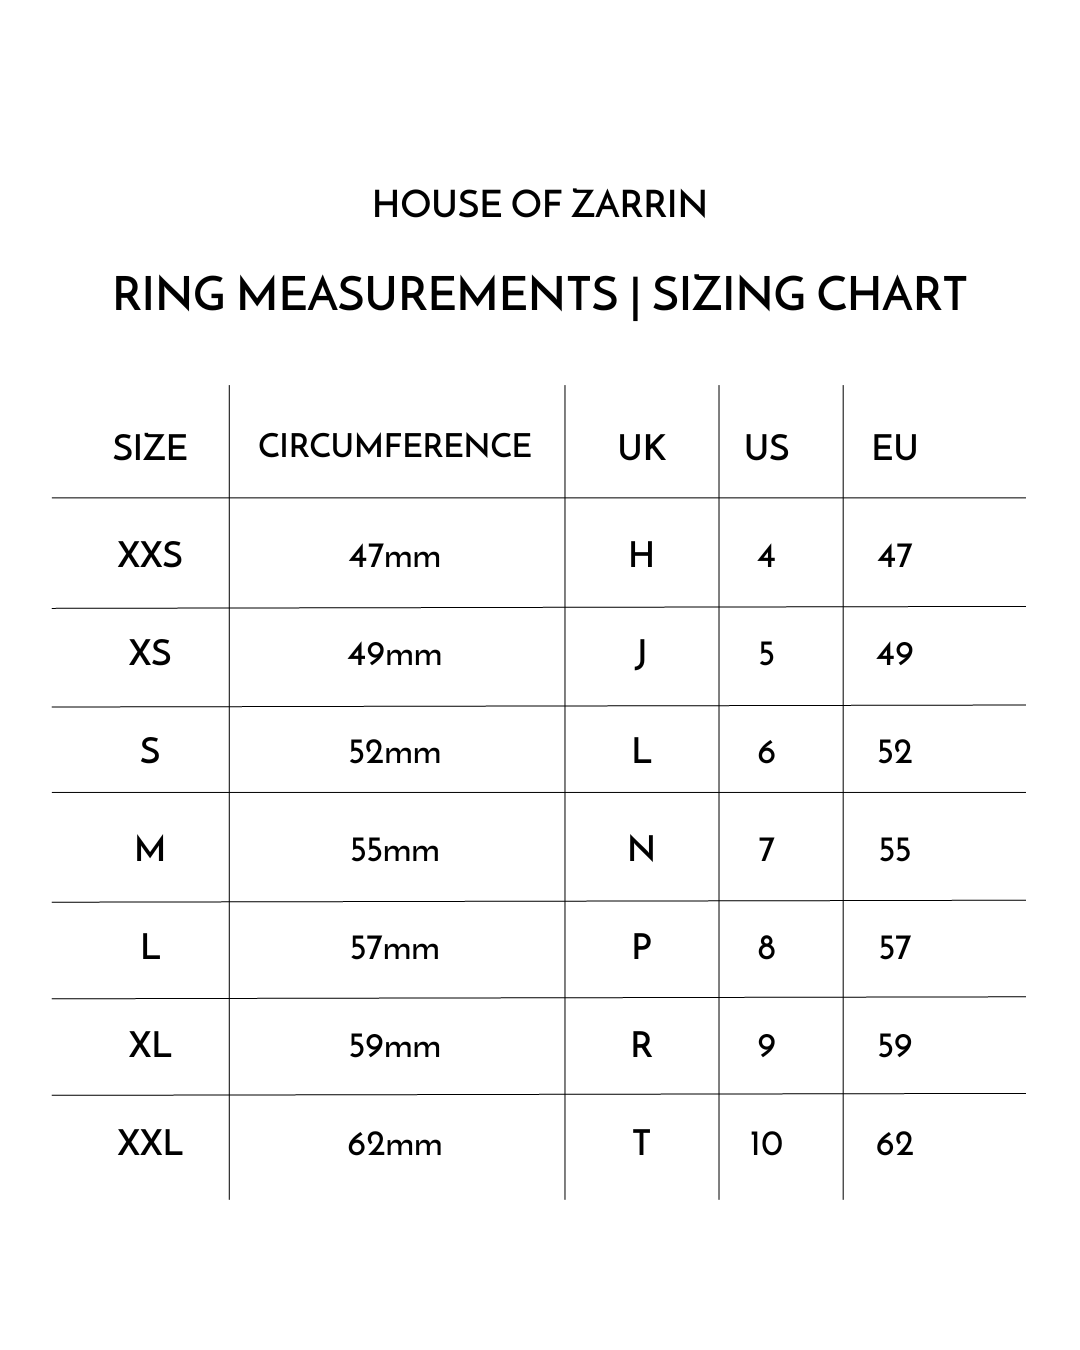 Ring Sizing - How to Find Your Ring Size